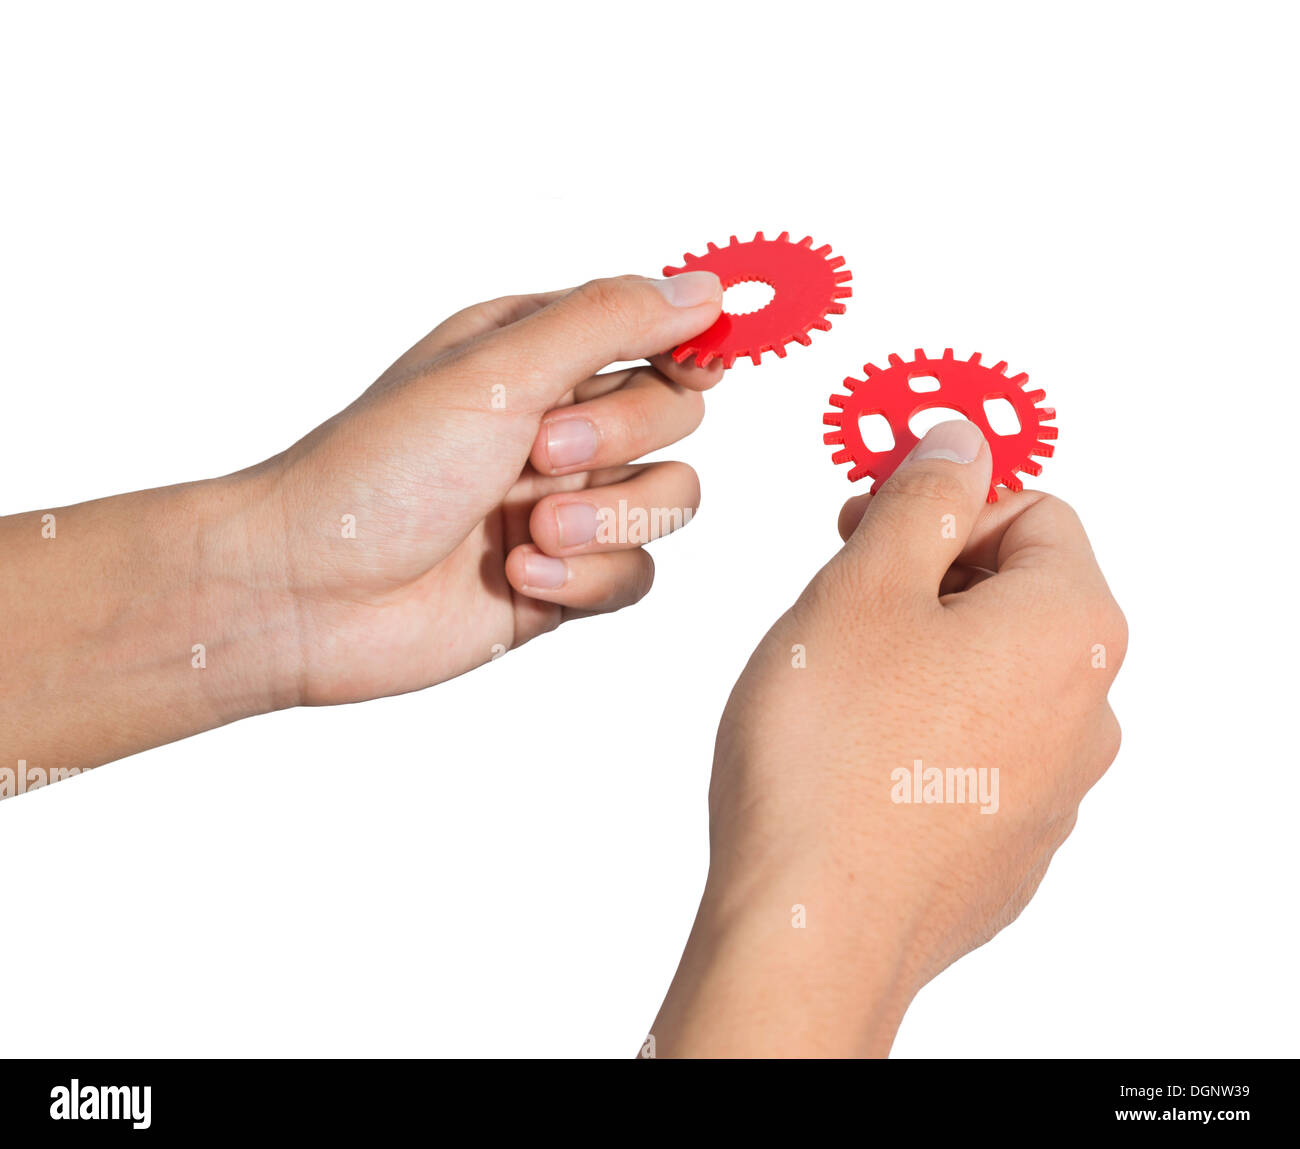 Man designing a mechanic system with red cog gear wheels. Stock Photo